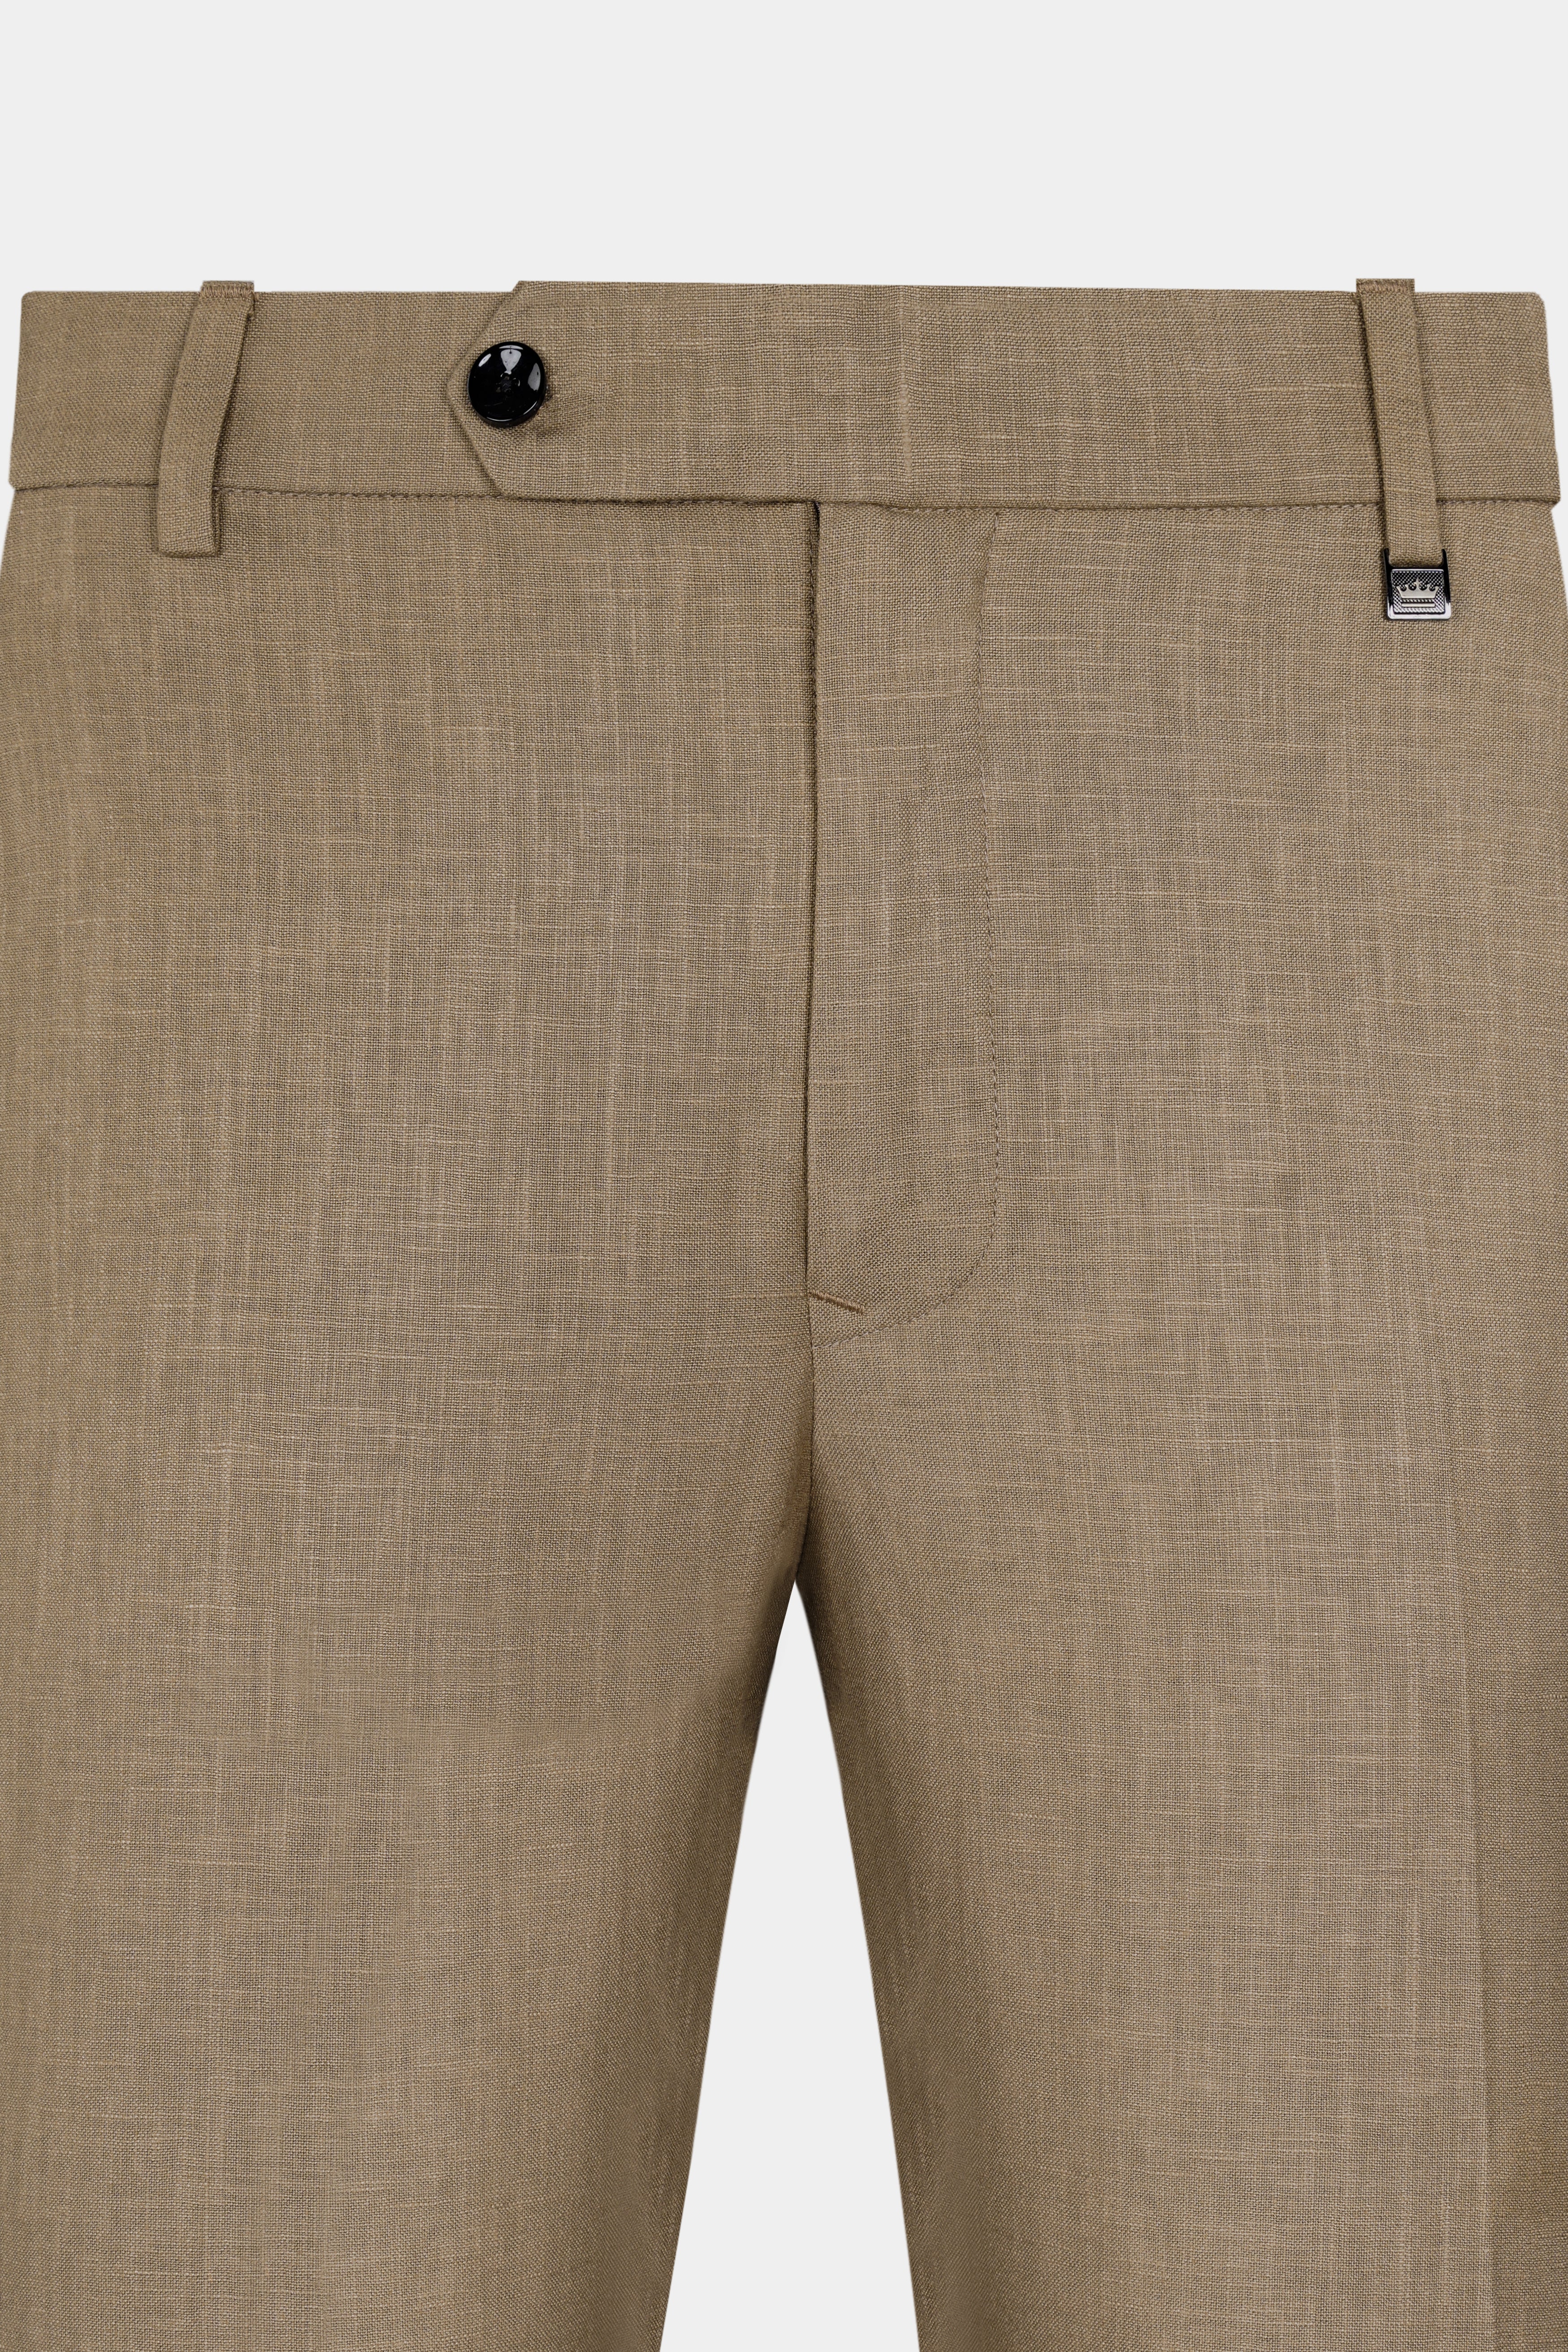 Buy Linen Pants For Women Online In India At Best Price Offers | Tata CLiQ